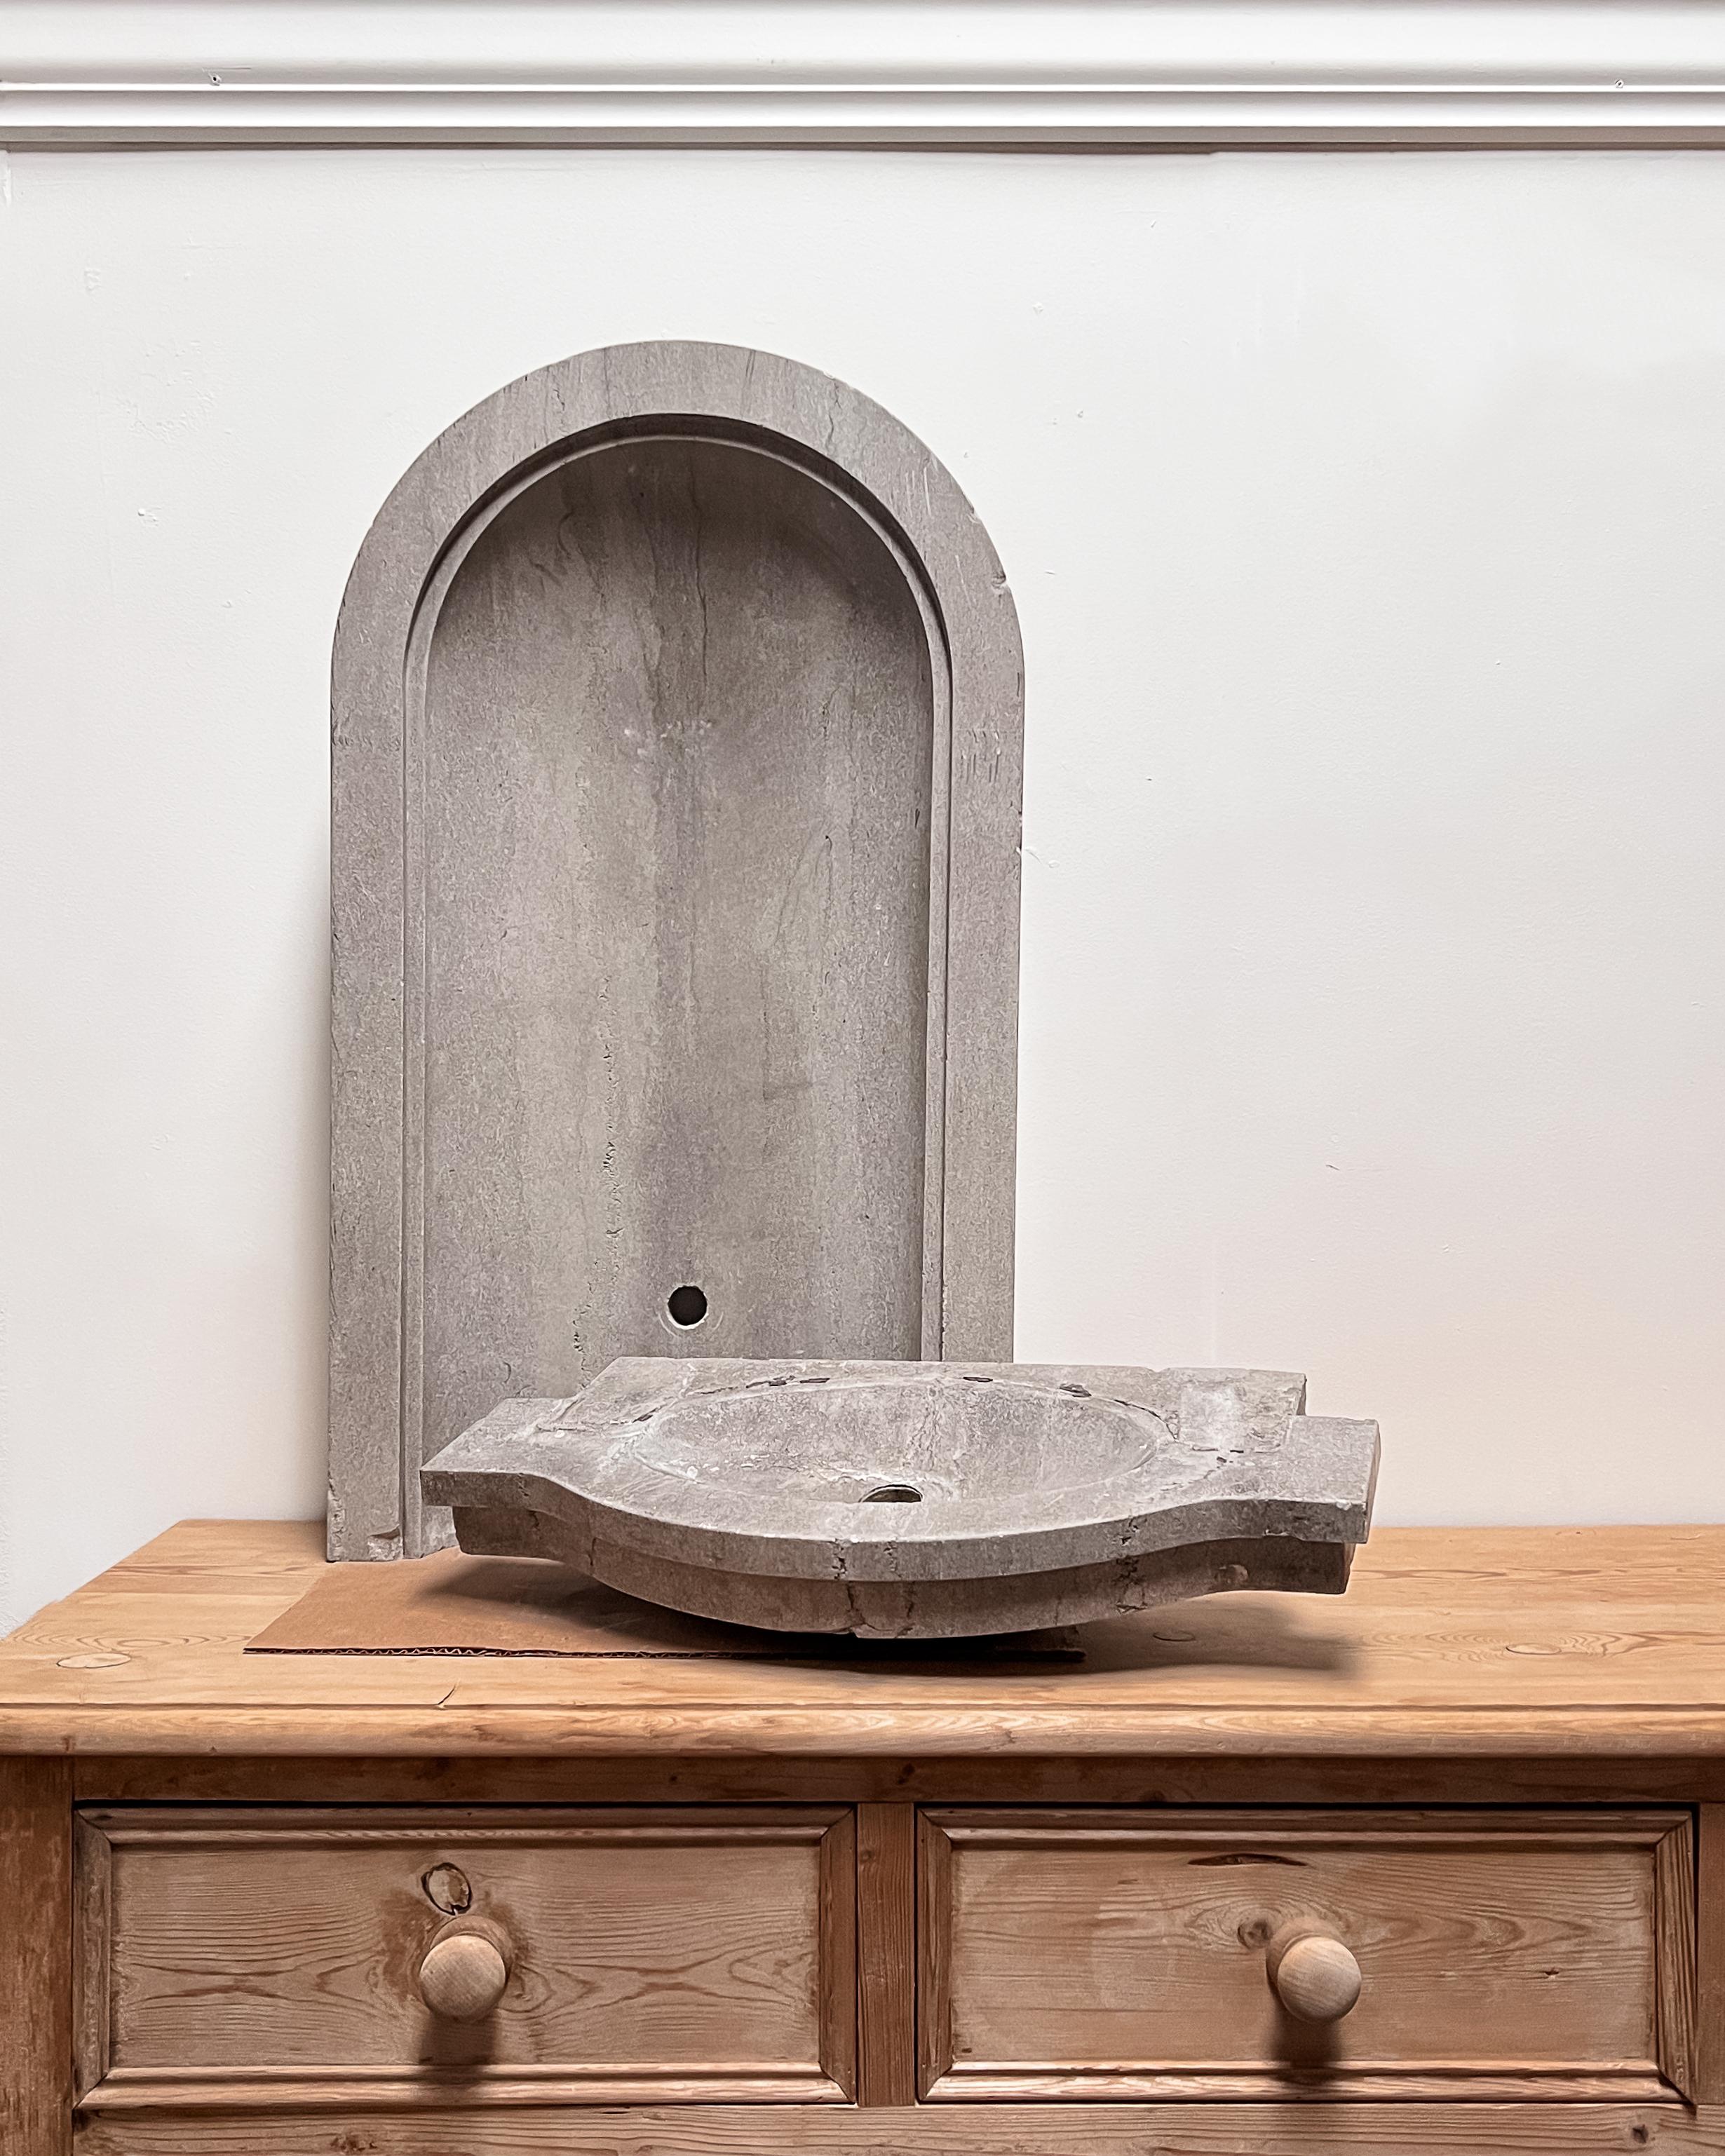 Reclaimed from the original Treasurer’s vault inside the Saline County Courthouse in Wilber, Nebraska, which was the ultimate in modern design when it was constructed in 1927. This unassuming blue-gray Carthage limestone wall fountain would make a